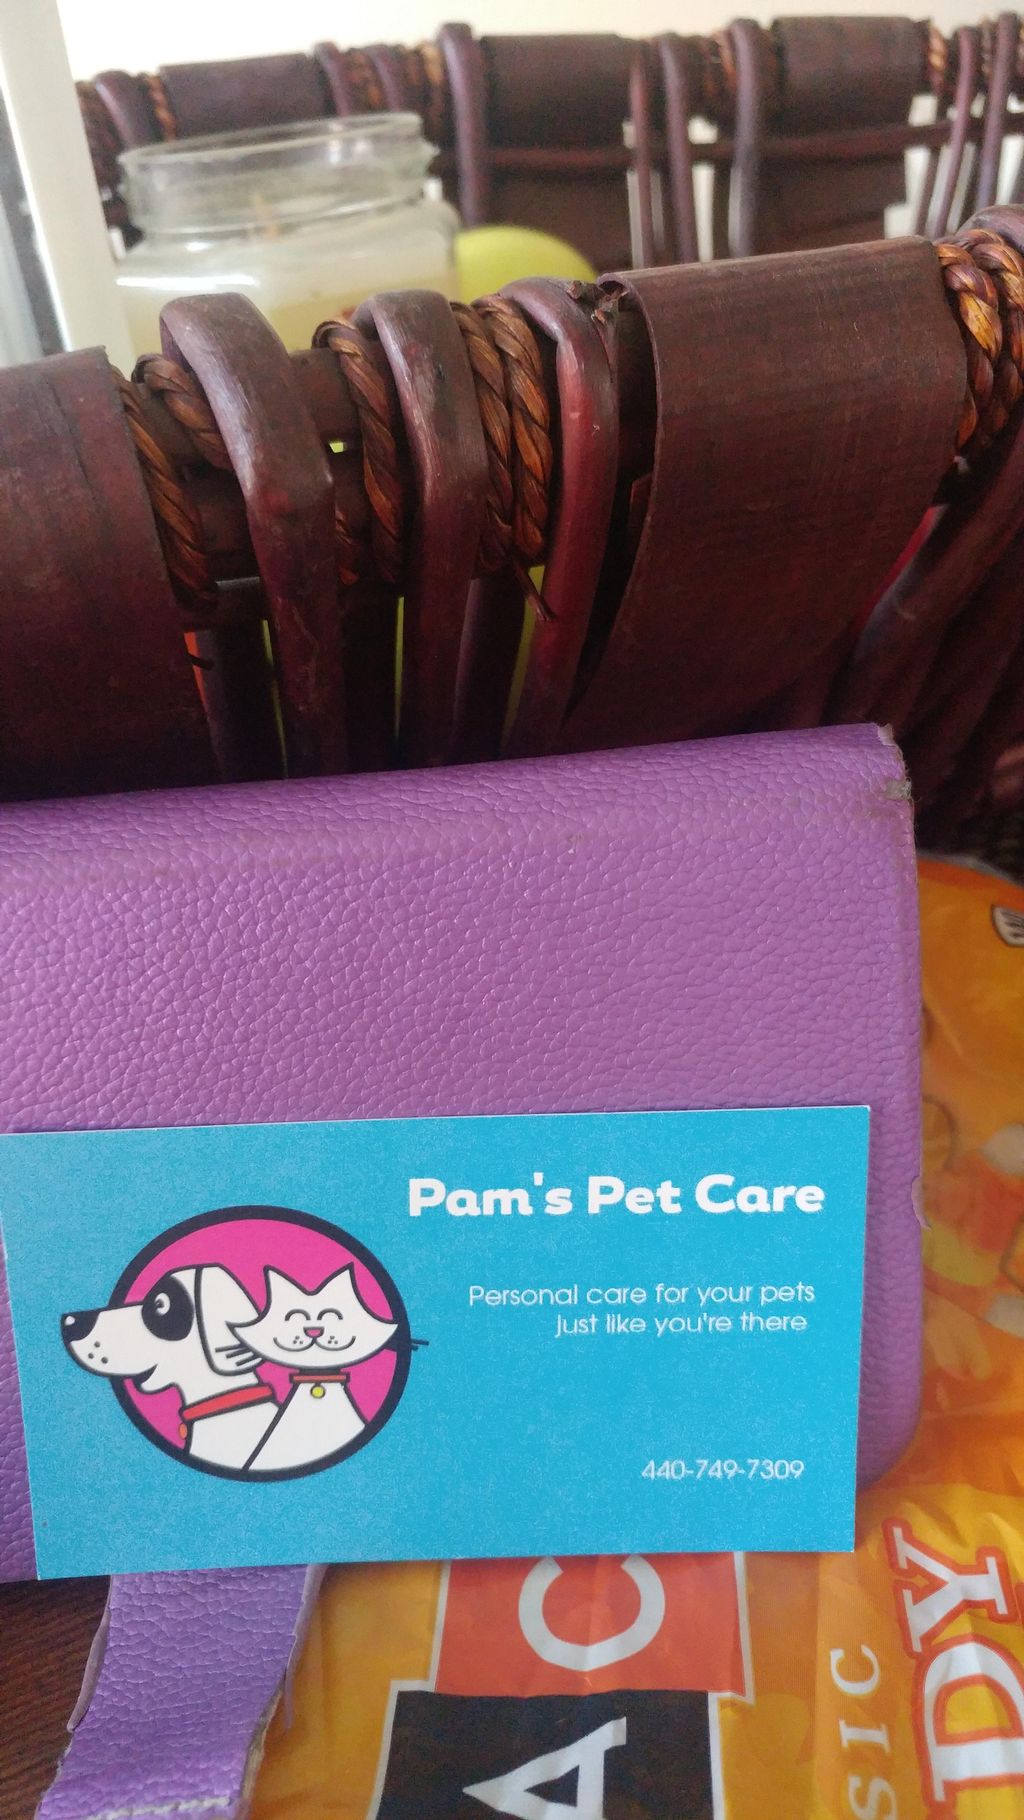 Pam's Pet Care Just Like You're there